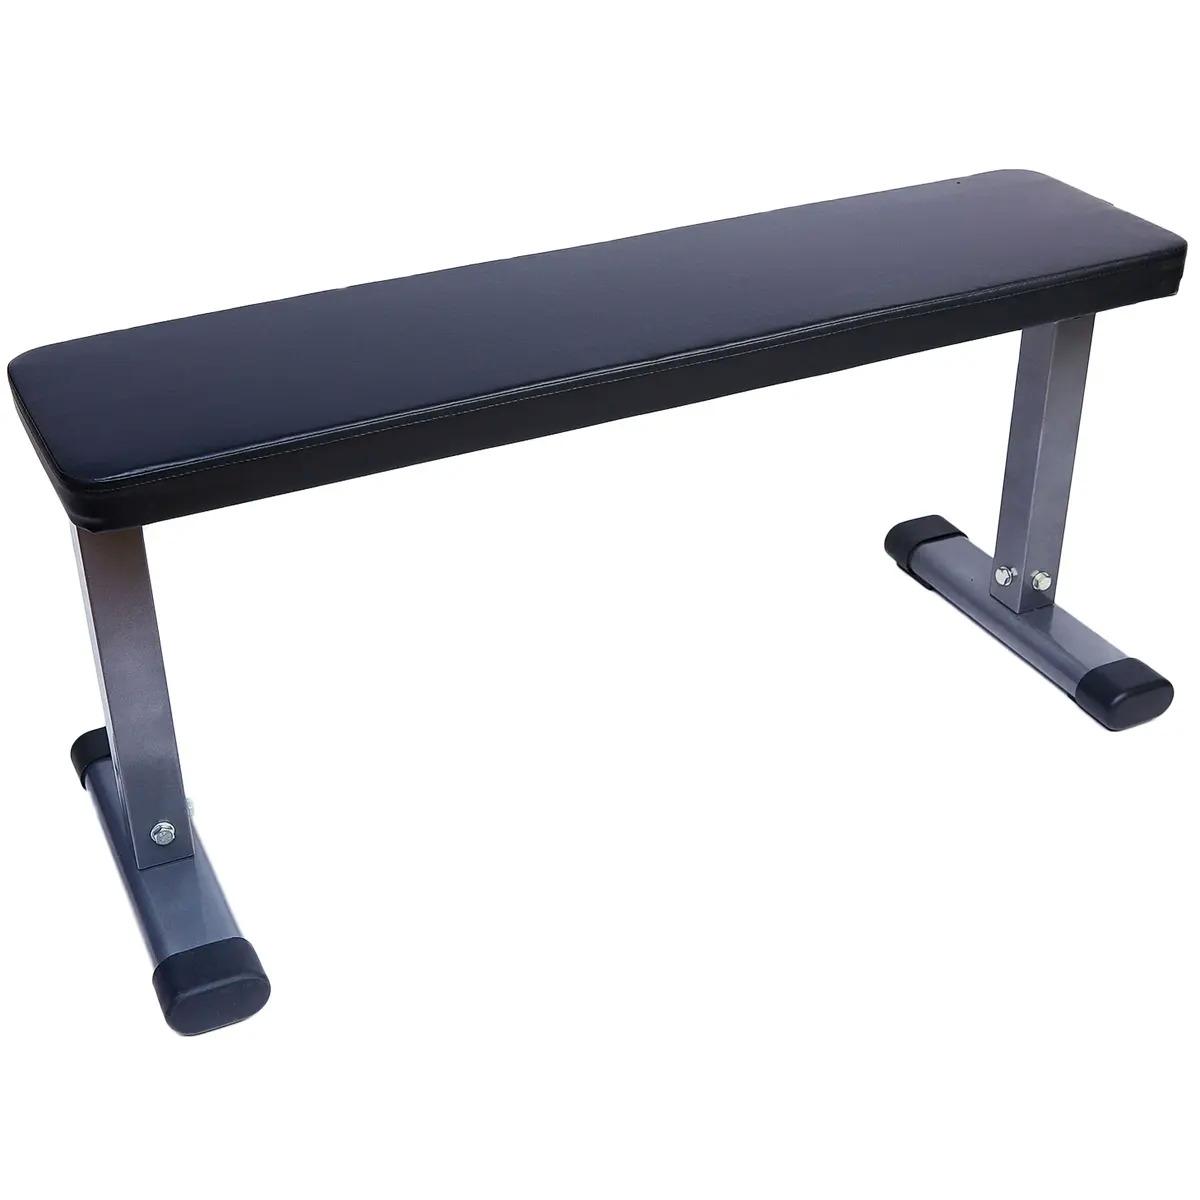 Everyday Essentials Steel Frame Flat Weight Training Exercise Bench for $29.99